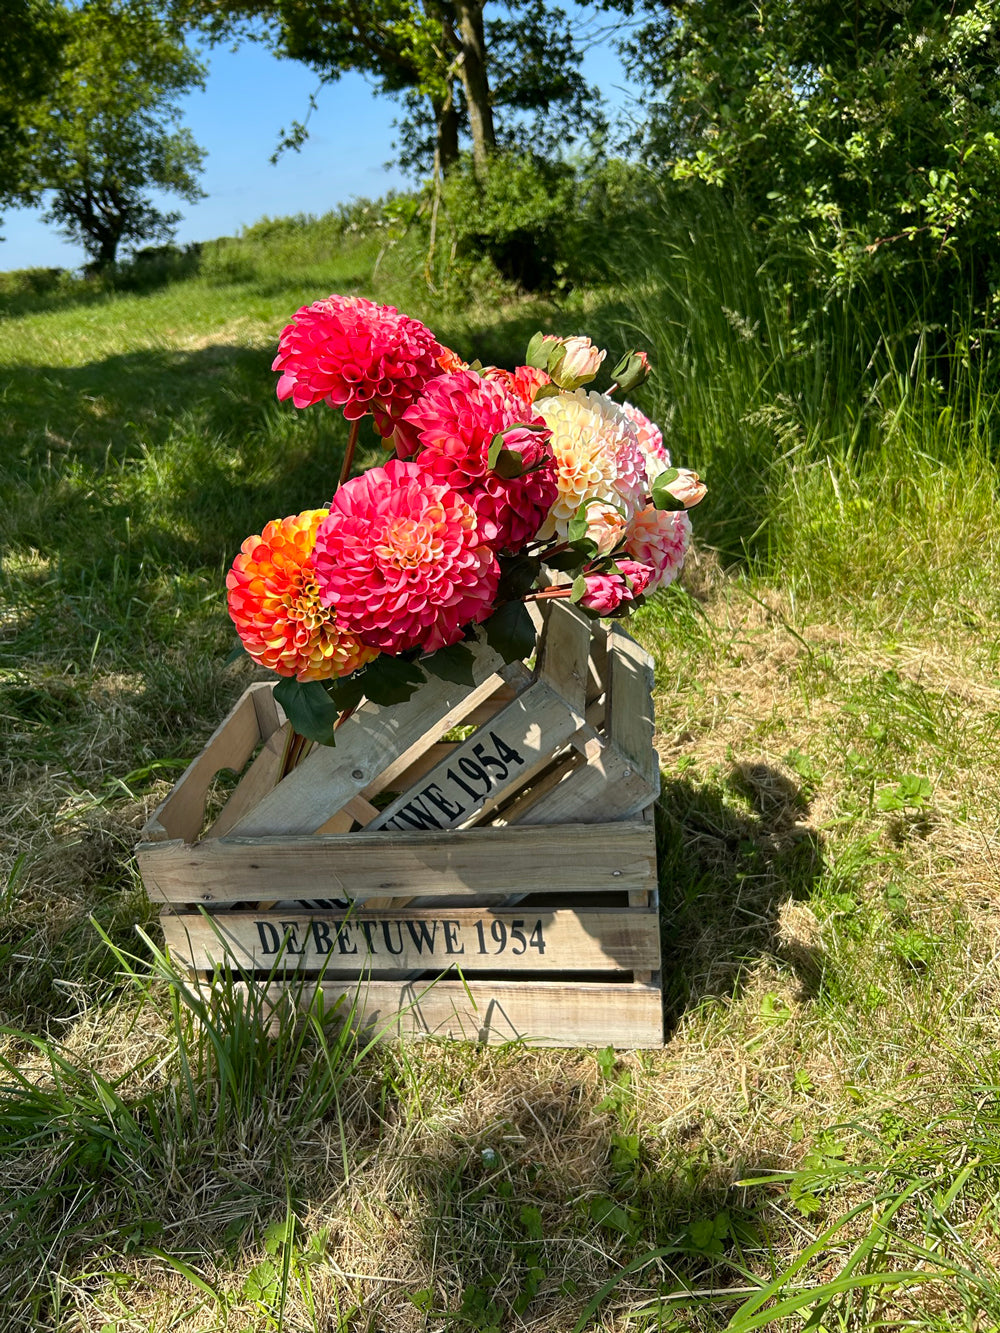 An array of pink, white, yellow and orange pom-pom dahlias in a wooden crate, outside on a beautiful sunny day!